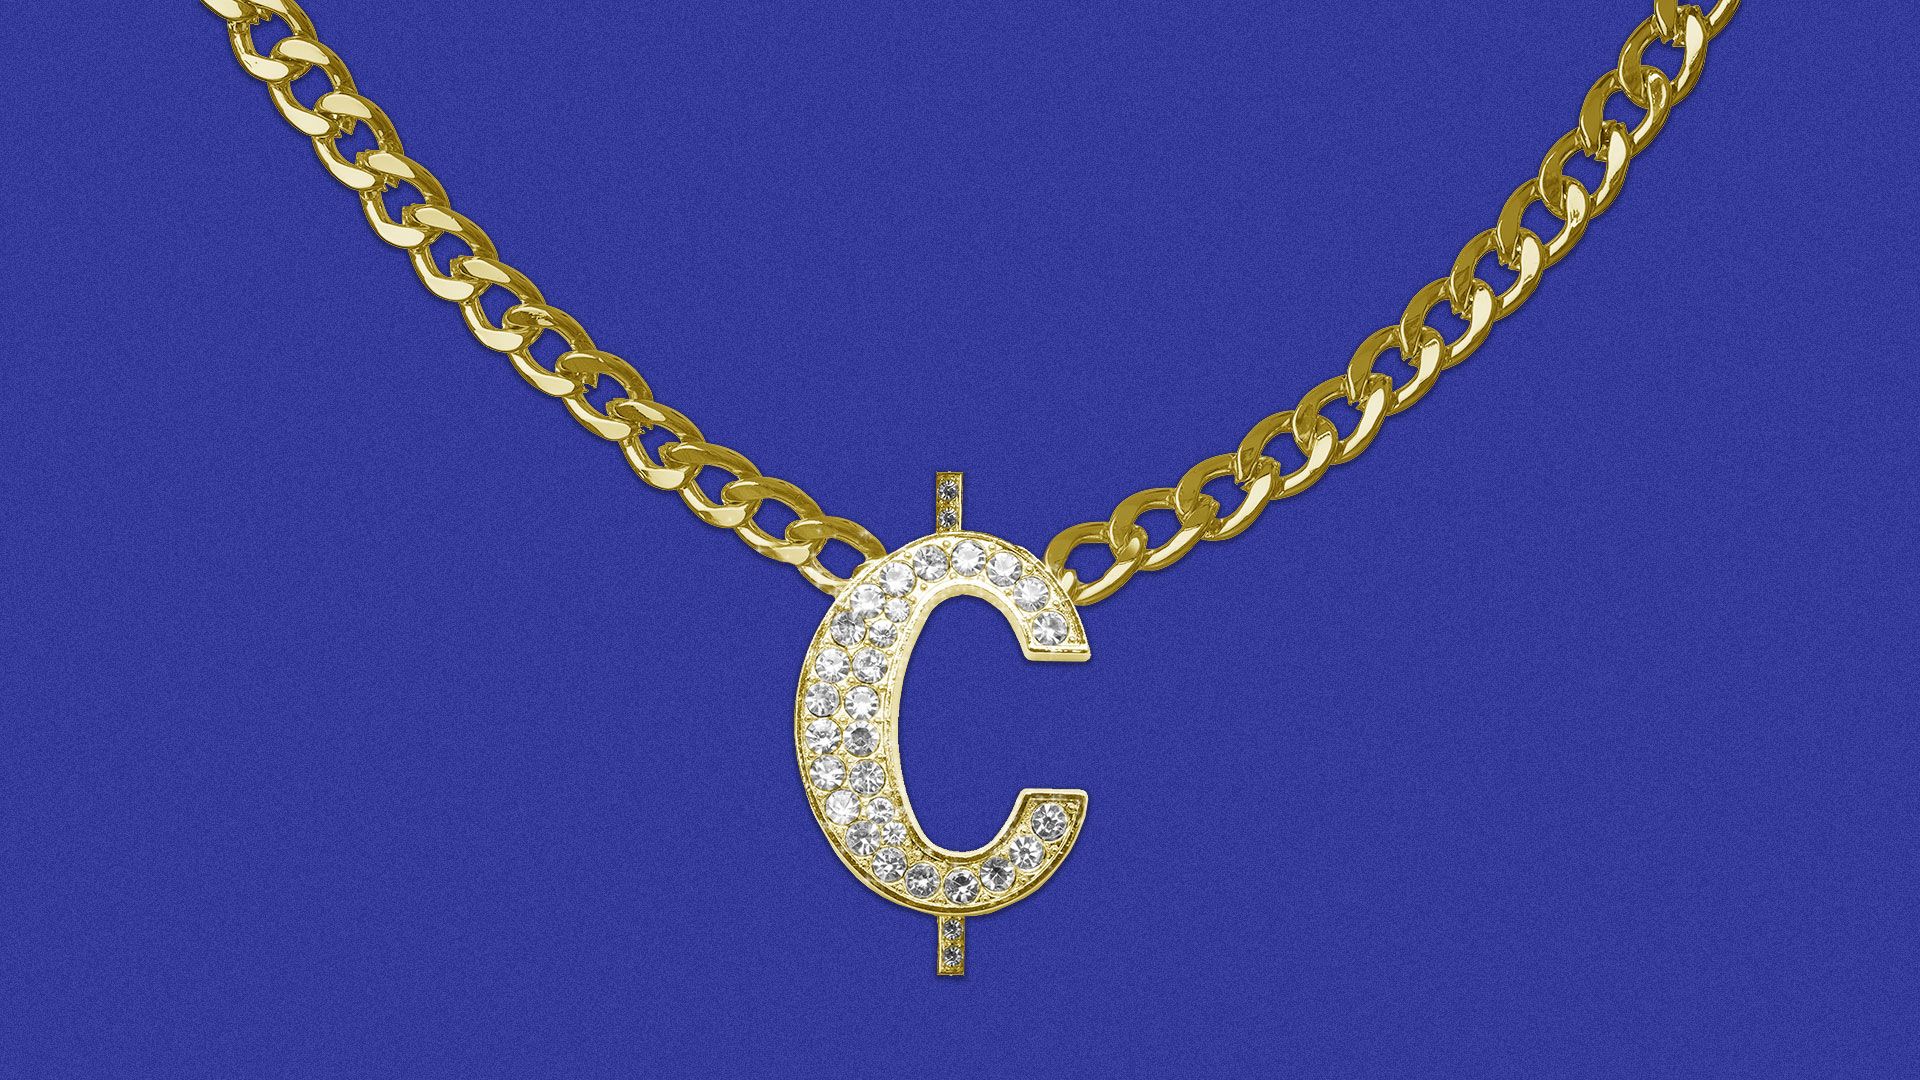 Illustration of a diamond chain with a cent symbol full of diamonds. 